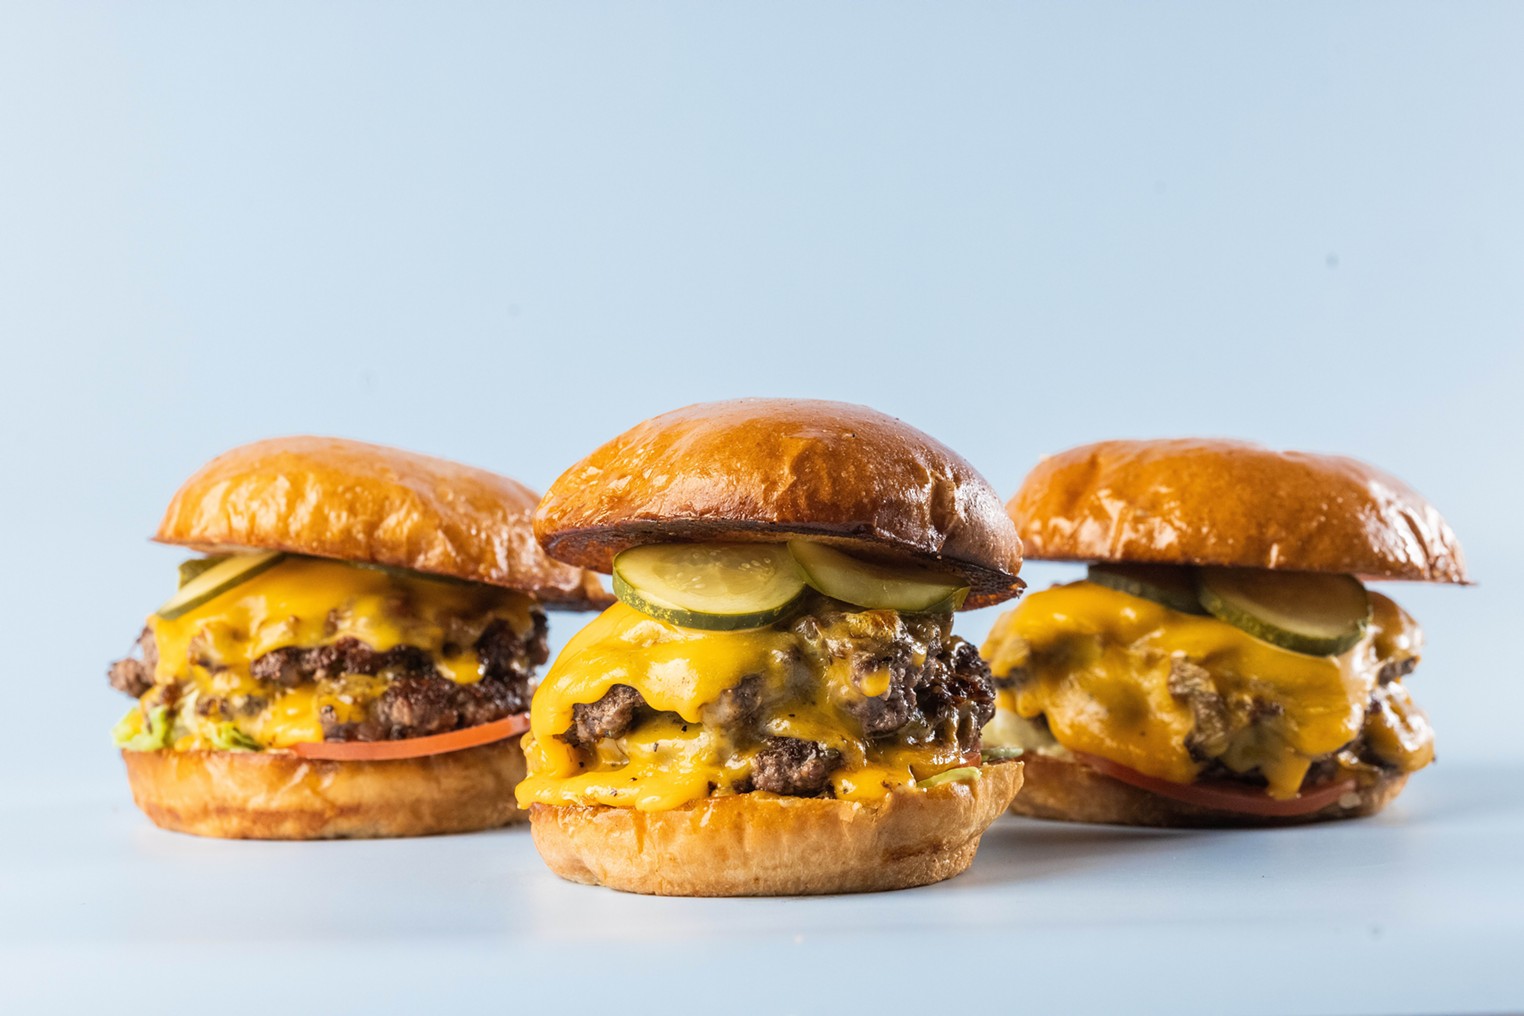 Quality Burgers: 4 Things You Need to Know About Certified Angus